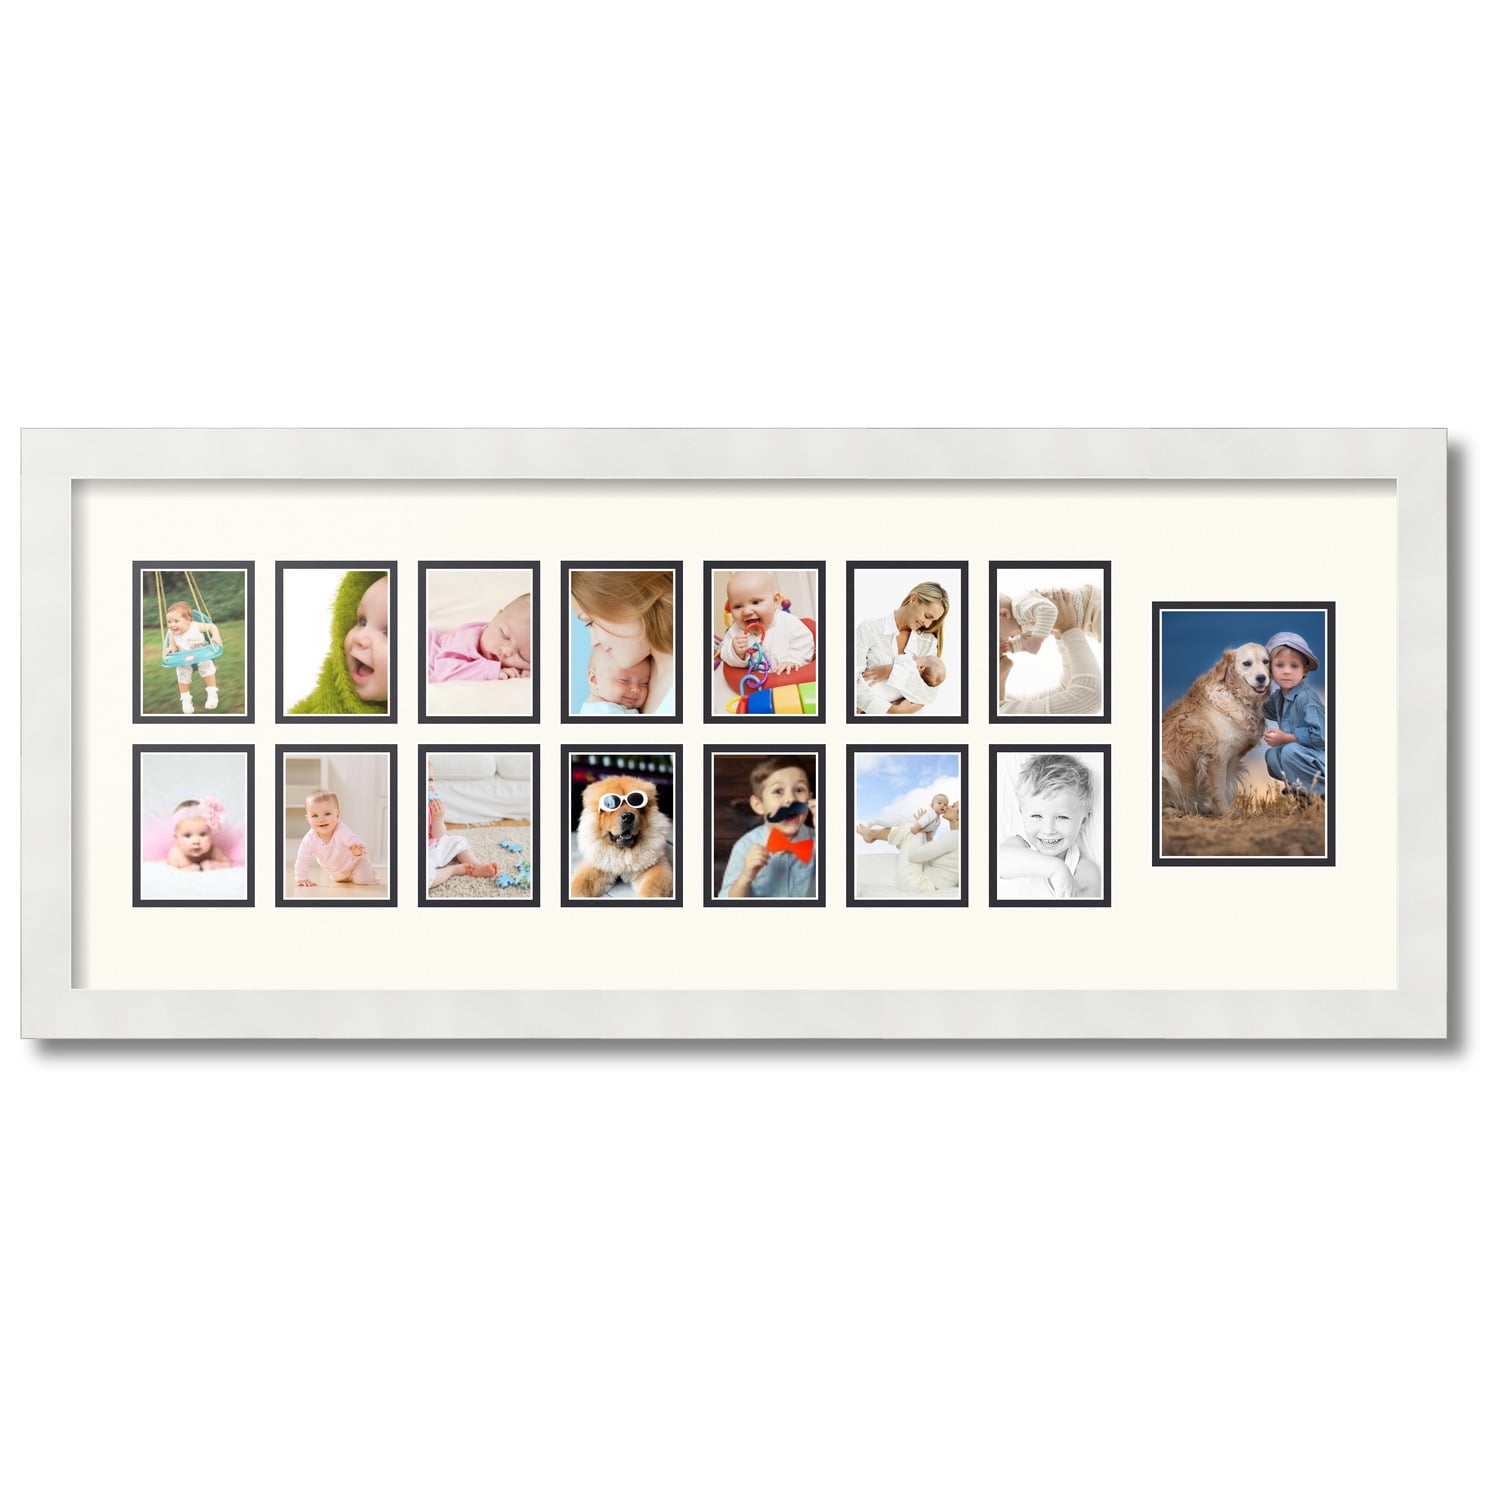 ArtToFrames Collage Photo Picture Frame with 1 - 8x10 and 2 - 5x7 Openings, Framed in Black with Super White and Black Mats (cdm-3926-78)